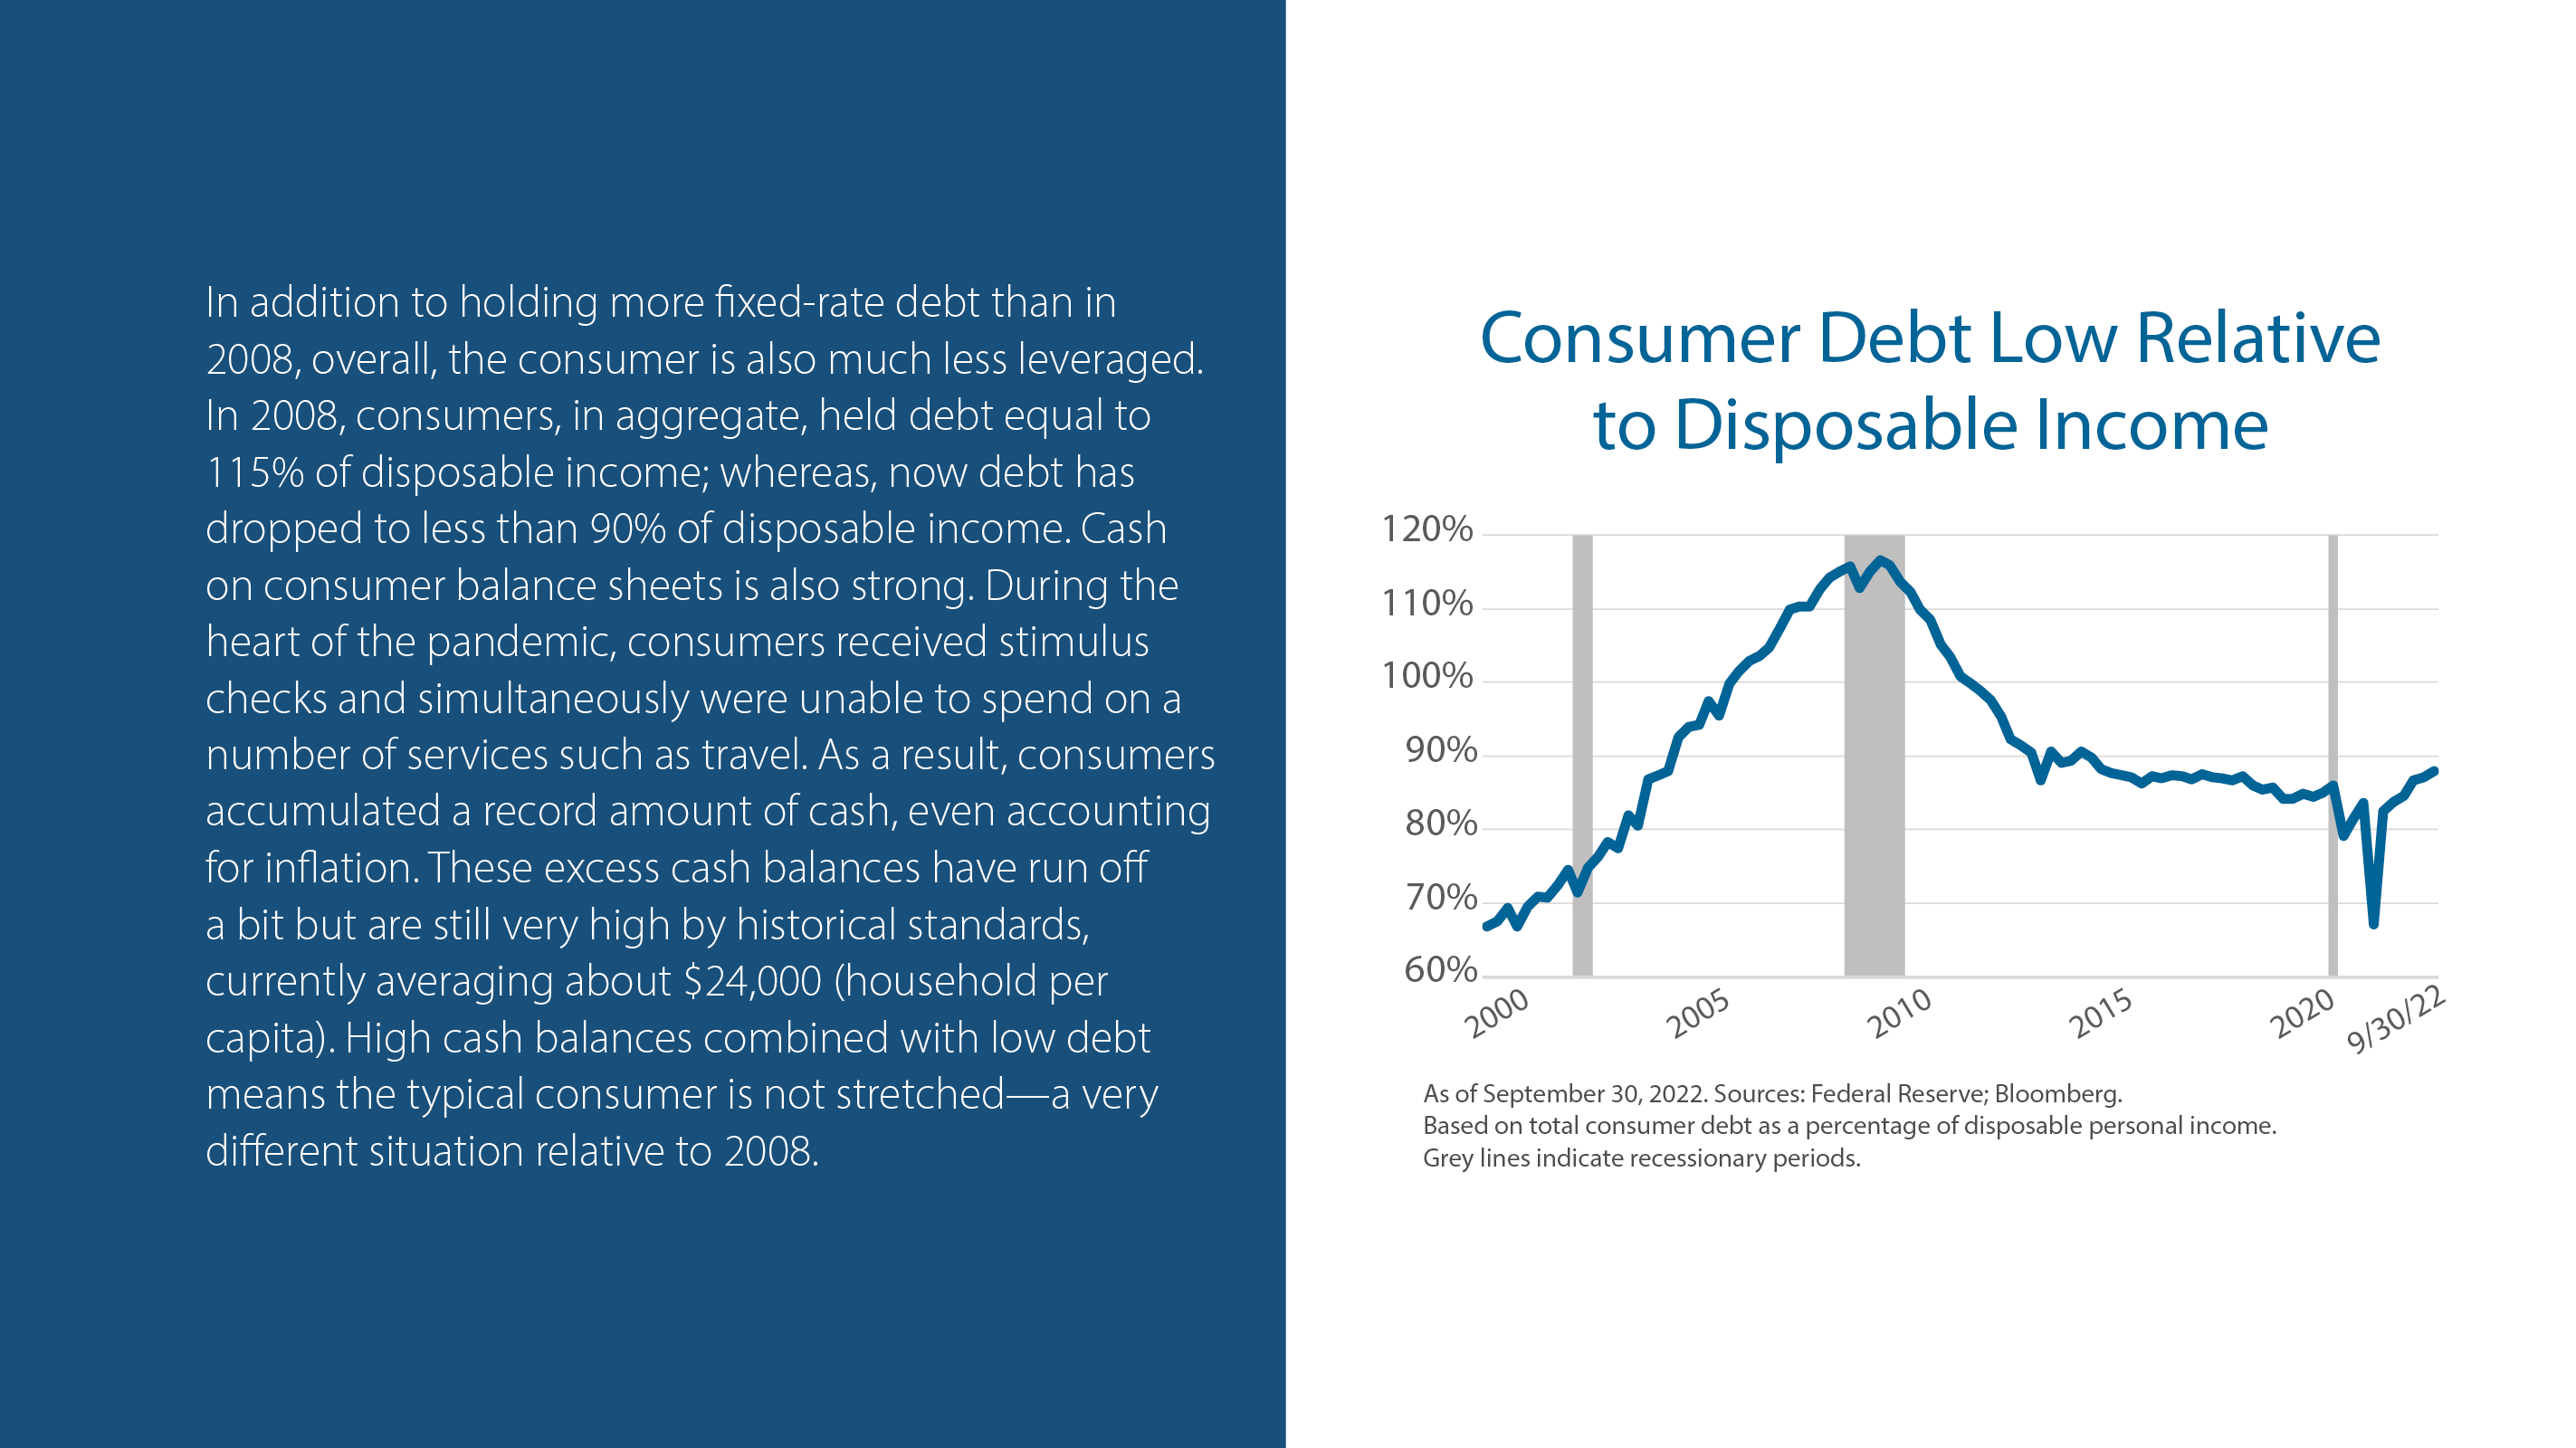 Consumer Debt Low Relative to Disposable Income